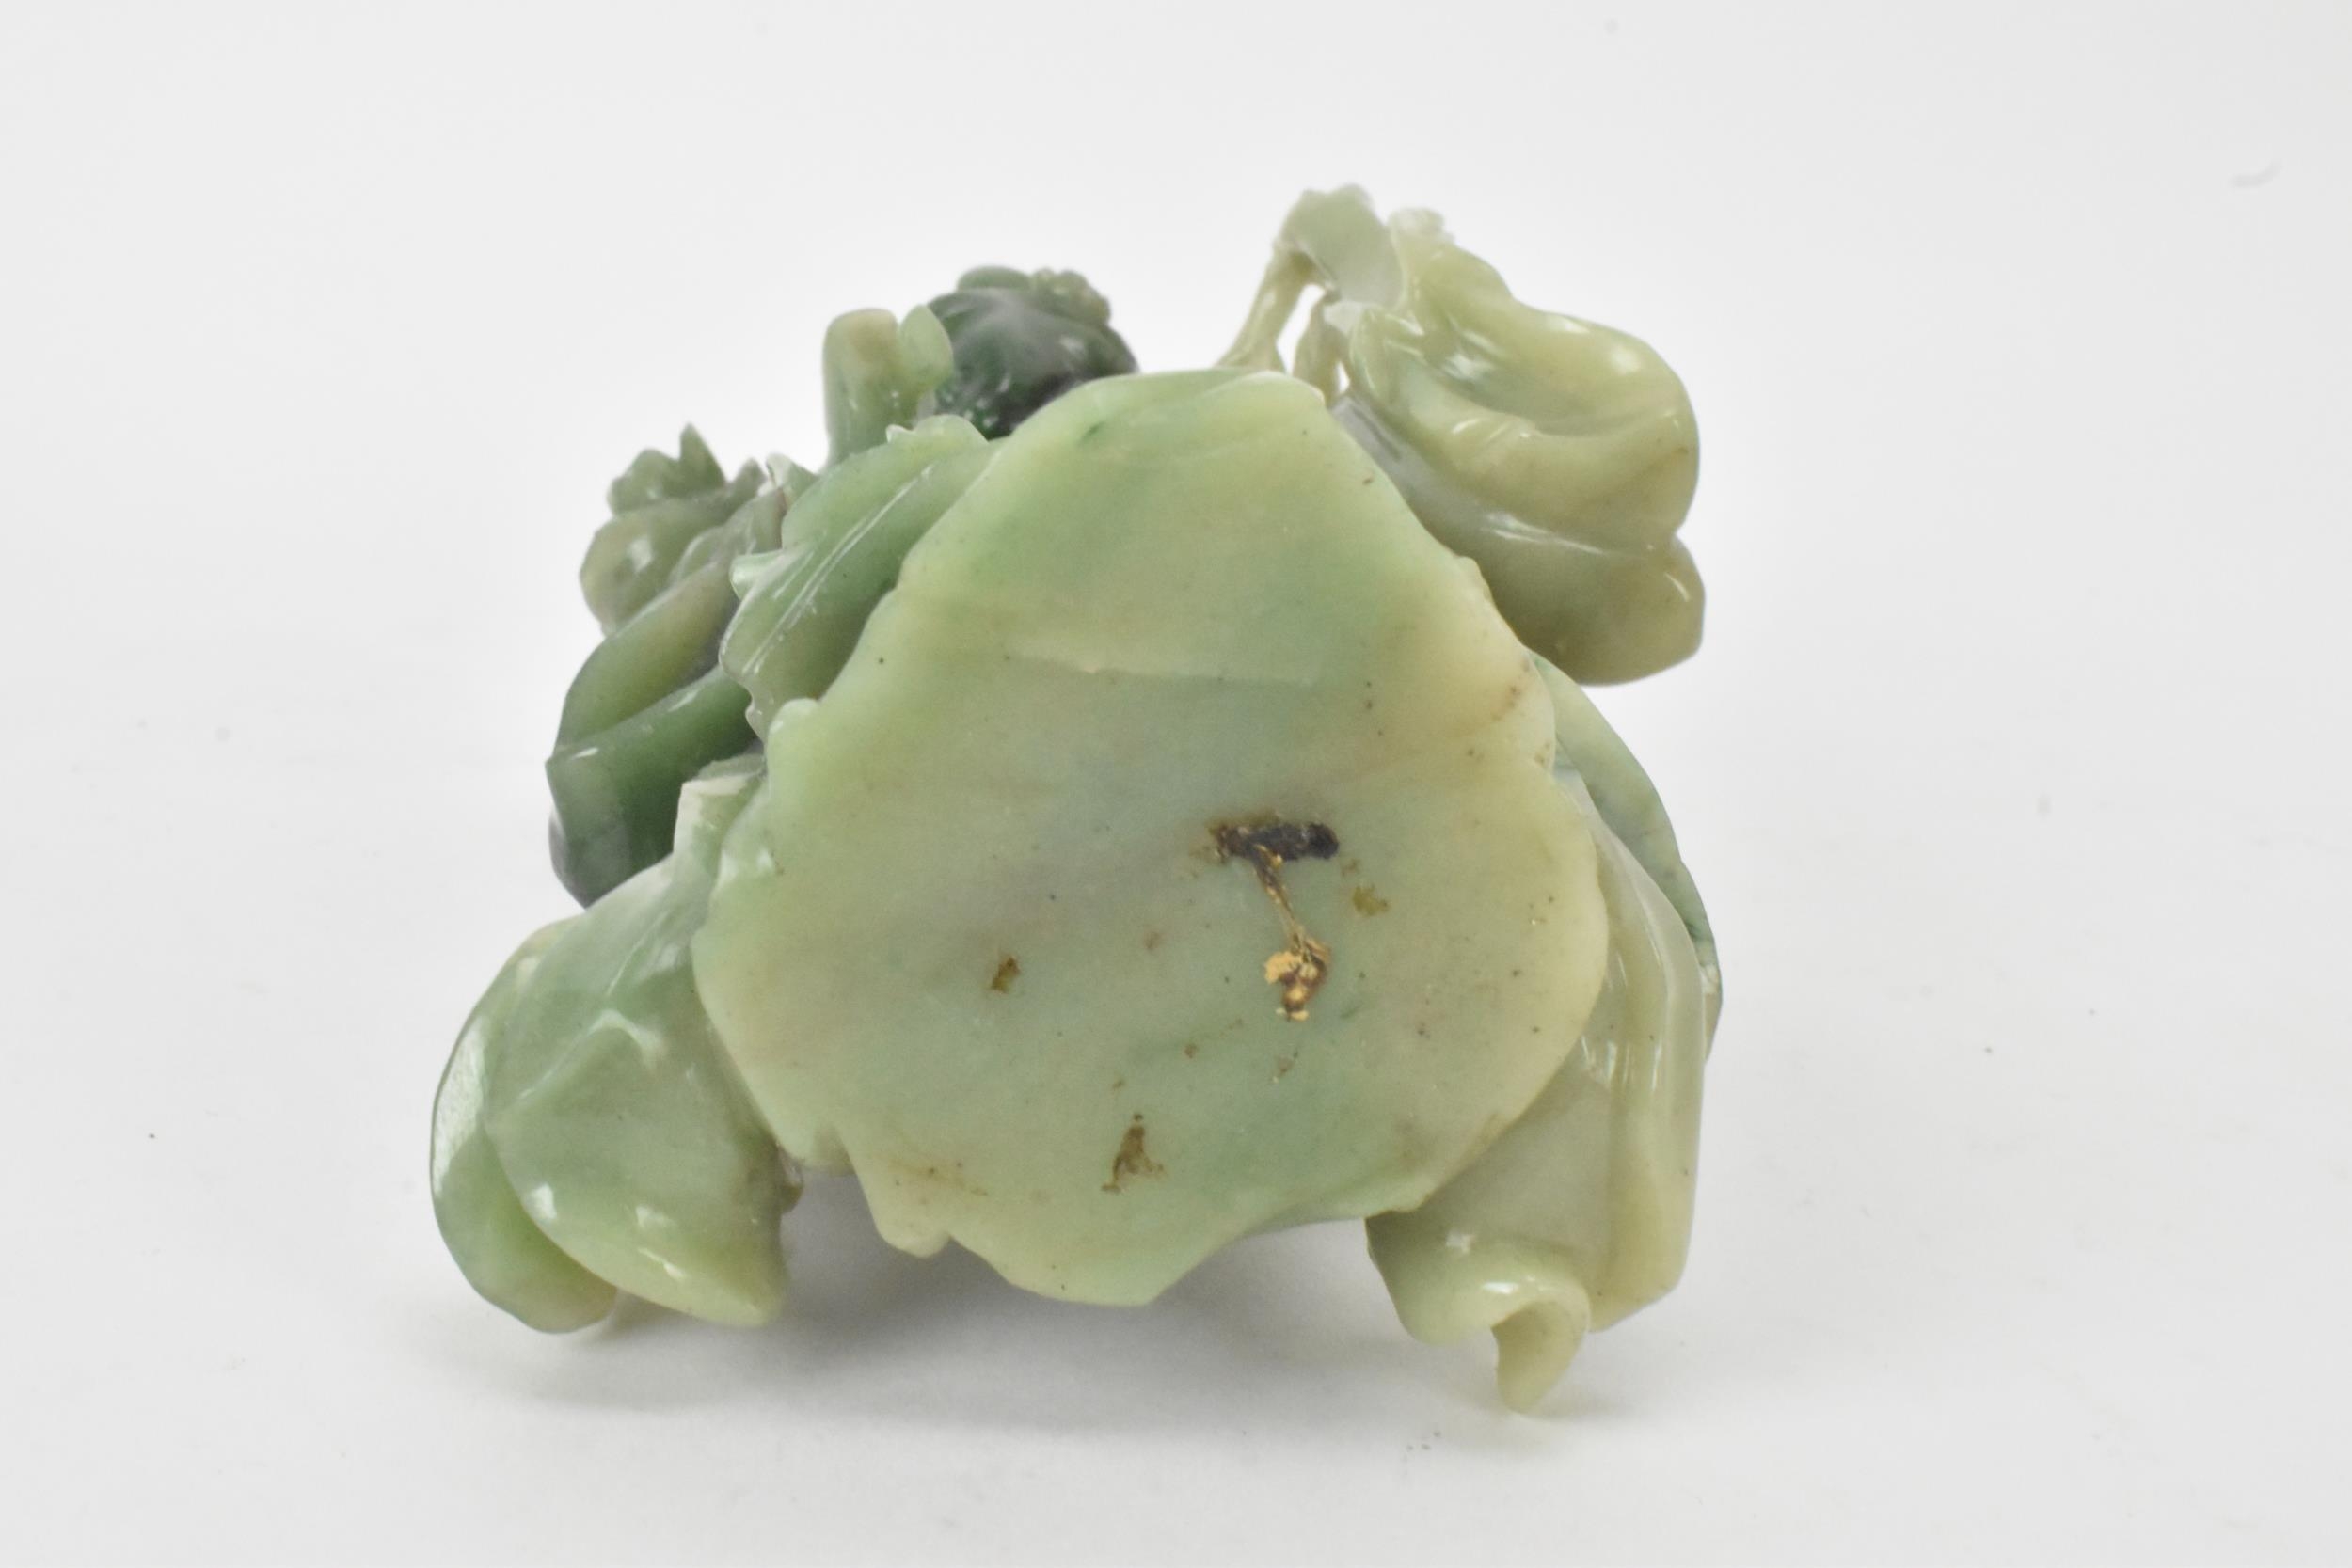 Two Chinese 20th century jadeite carved figures, the green example modeled holding a fan and flowers - Image 7 of 7